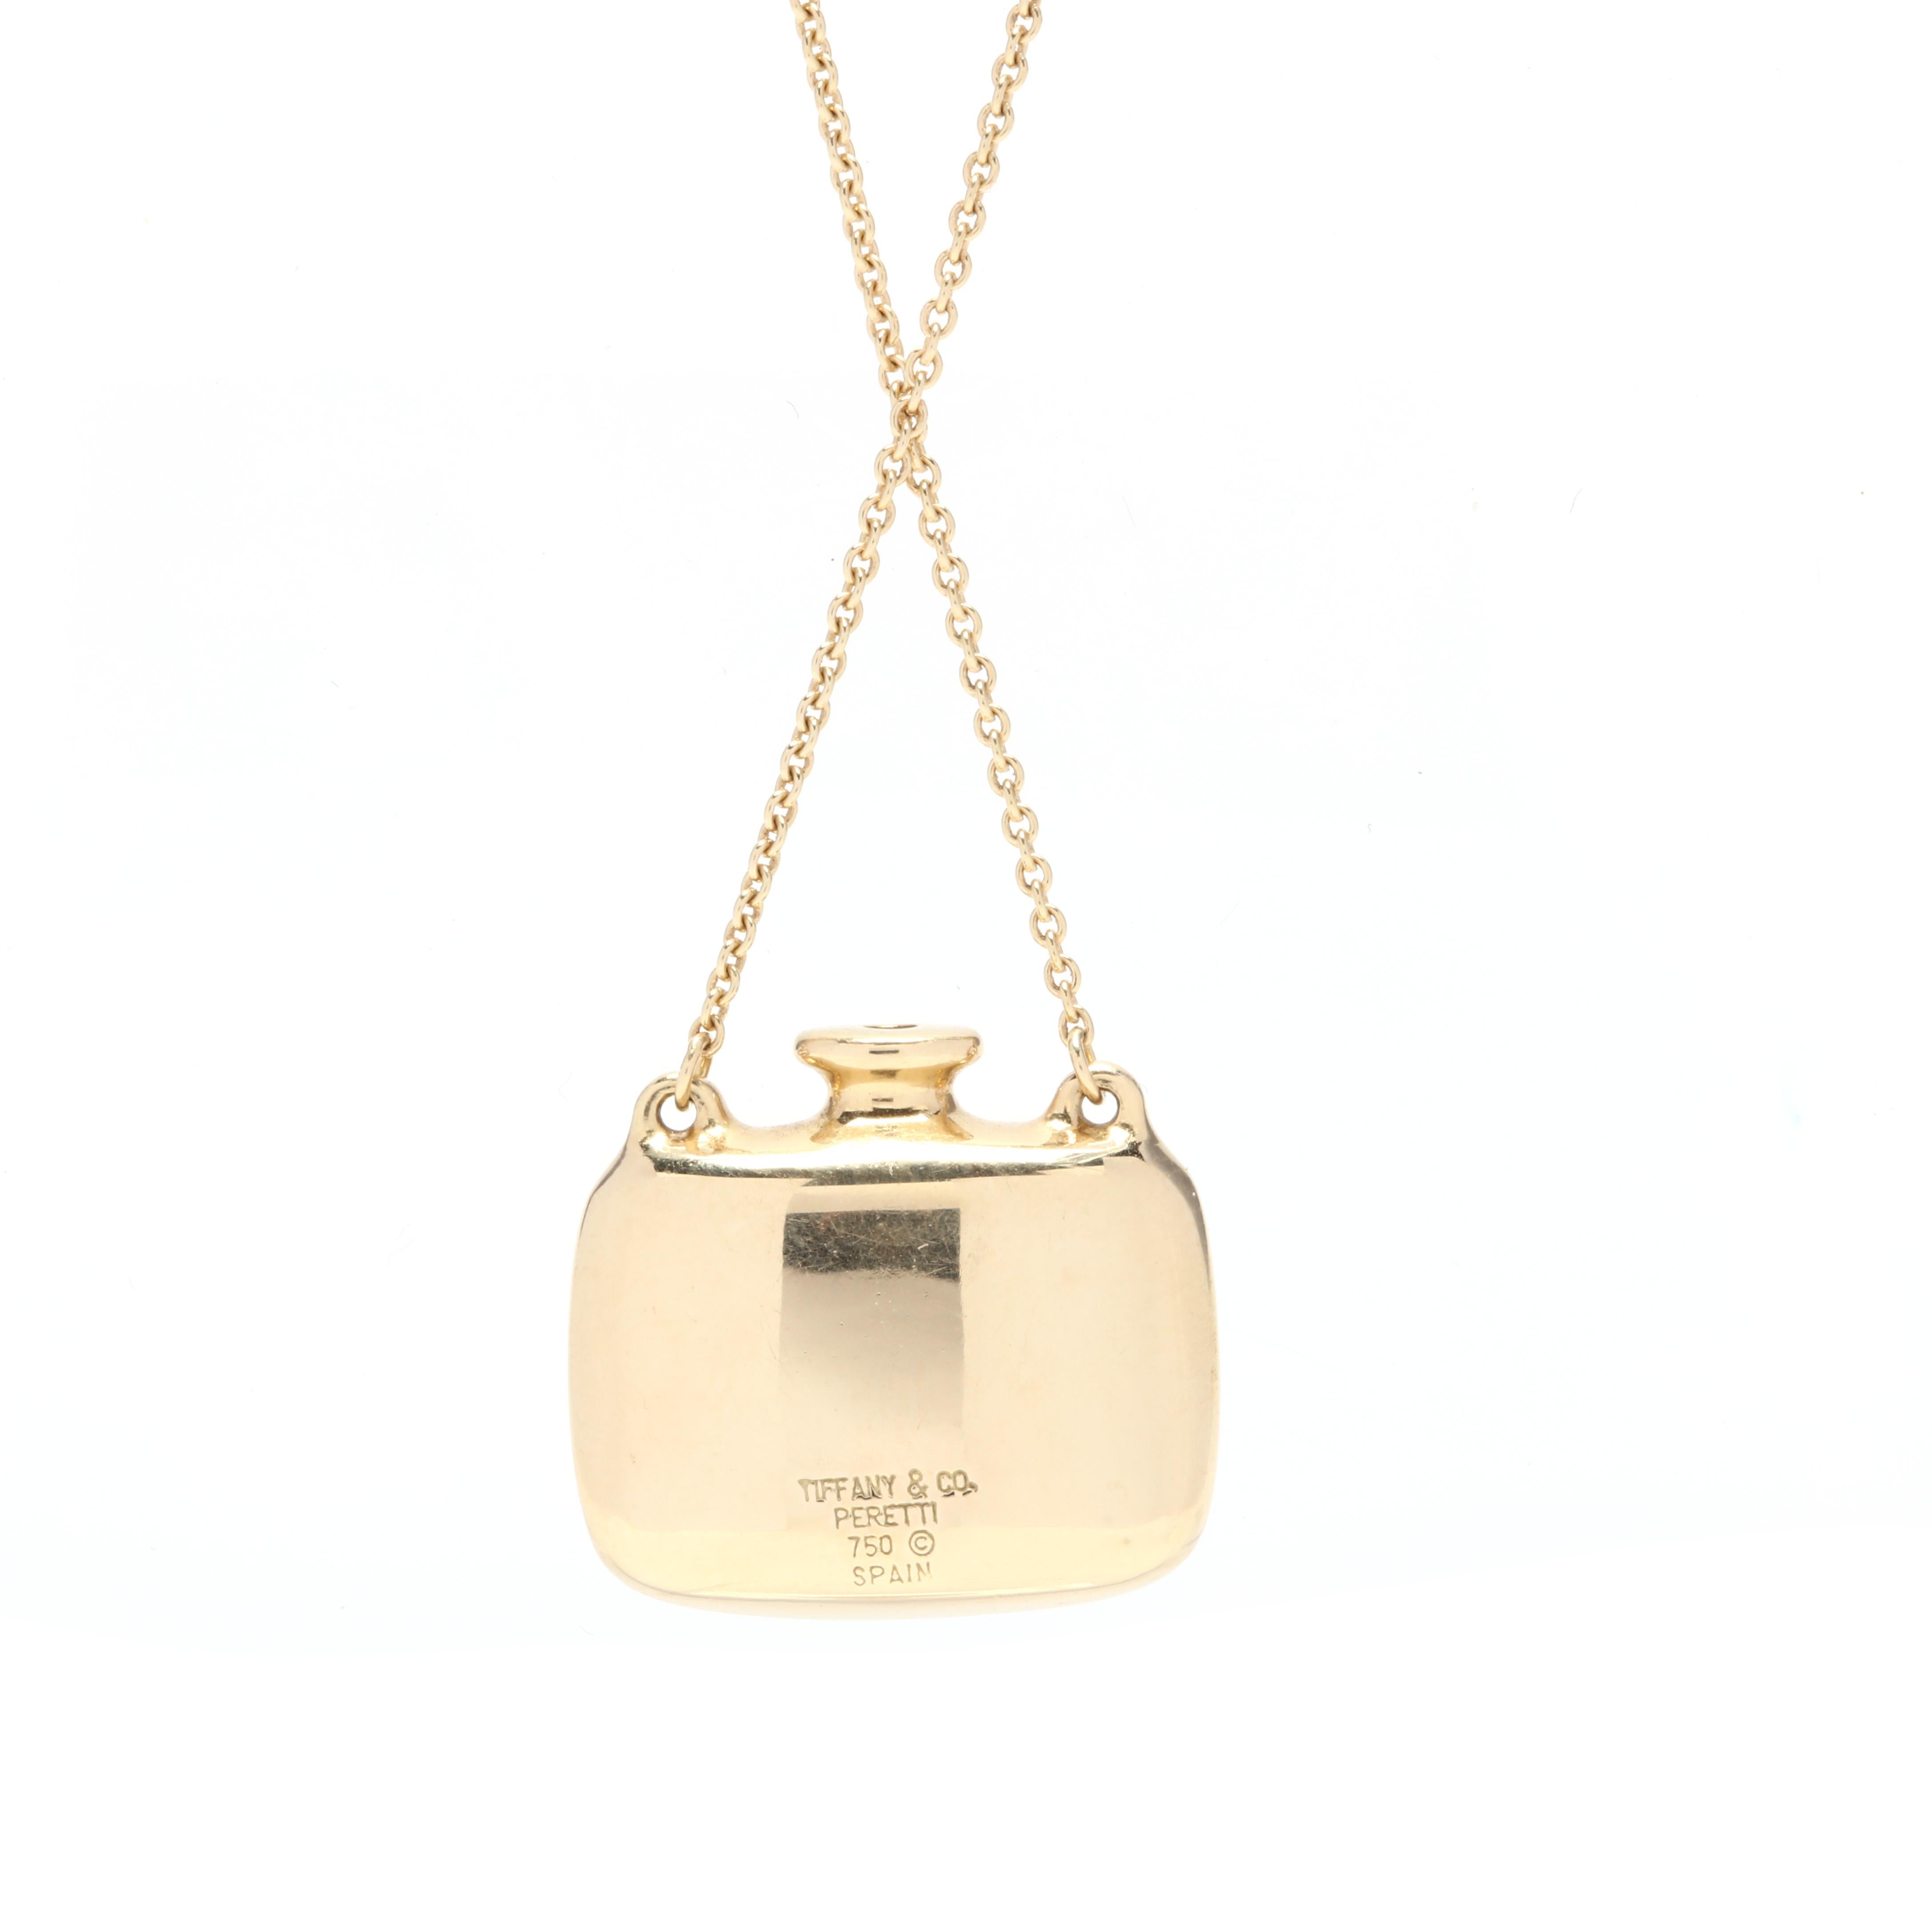 An Elsa Peretti for Tiffany & Co 18 karat yellow gold open bottle pendant necklace. This necklace features a rectangular perfume bottle motif suspended from a thin rolo chain.

Chain Length: 24.75 in.

Pendant Length: 5/8 in.

Pendant Width: 3/4